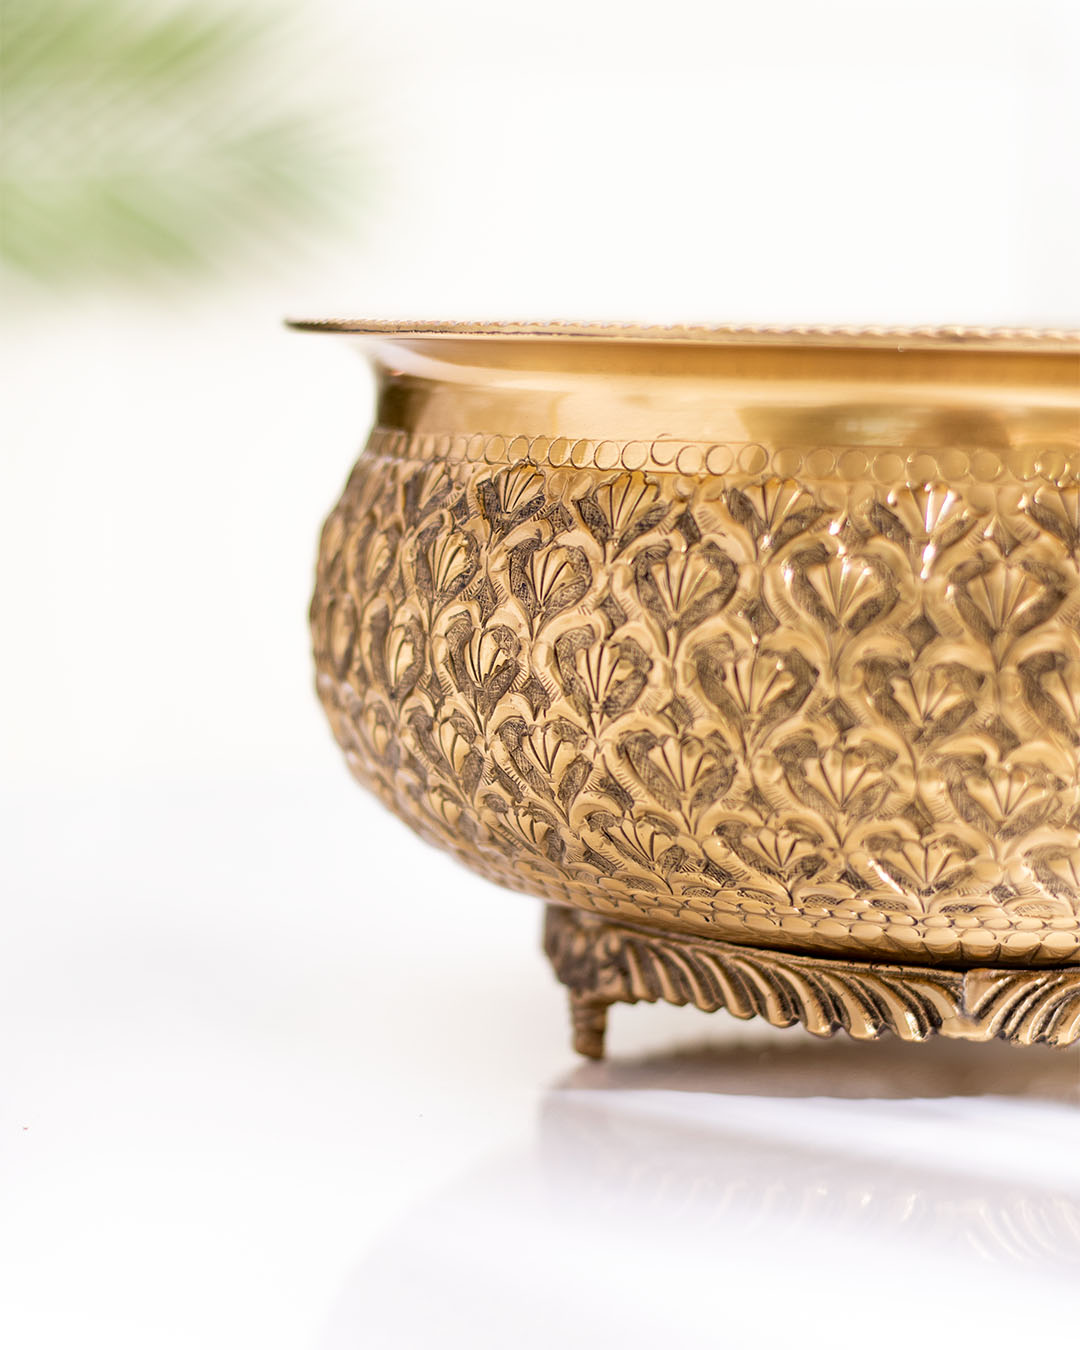 'Embossed' Handcrafted Bowl